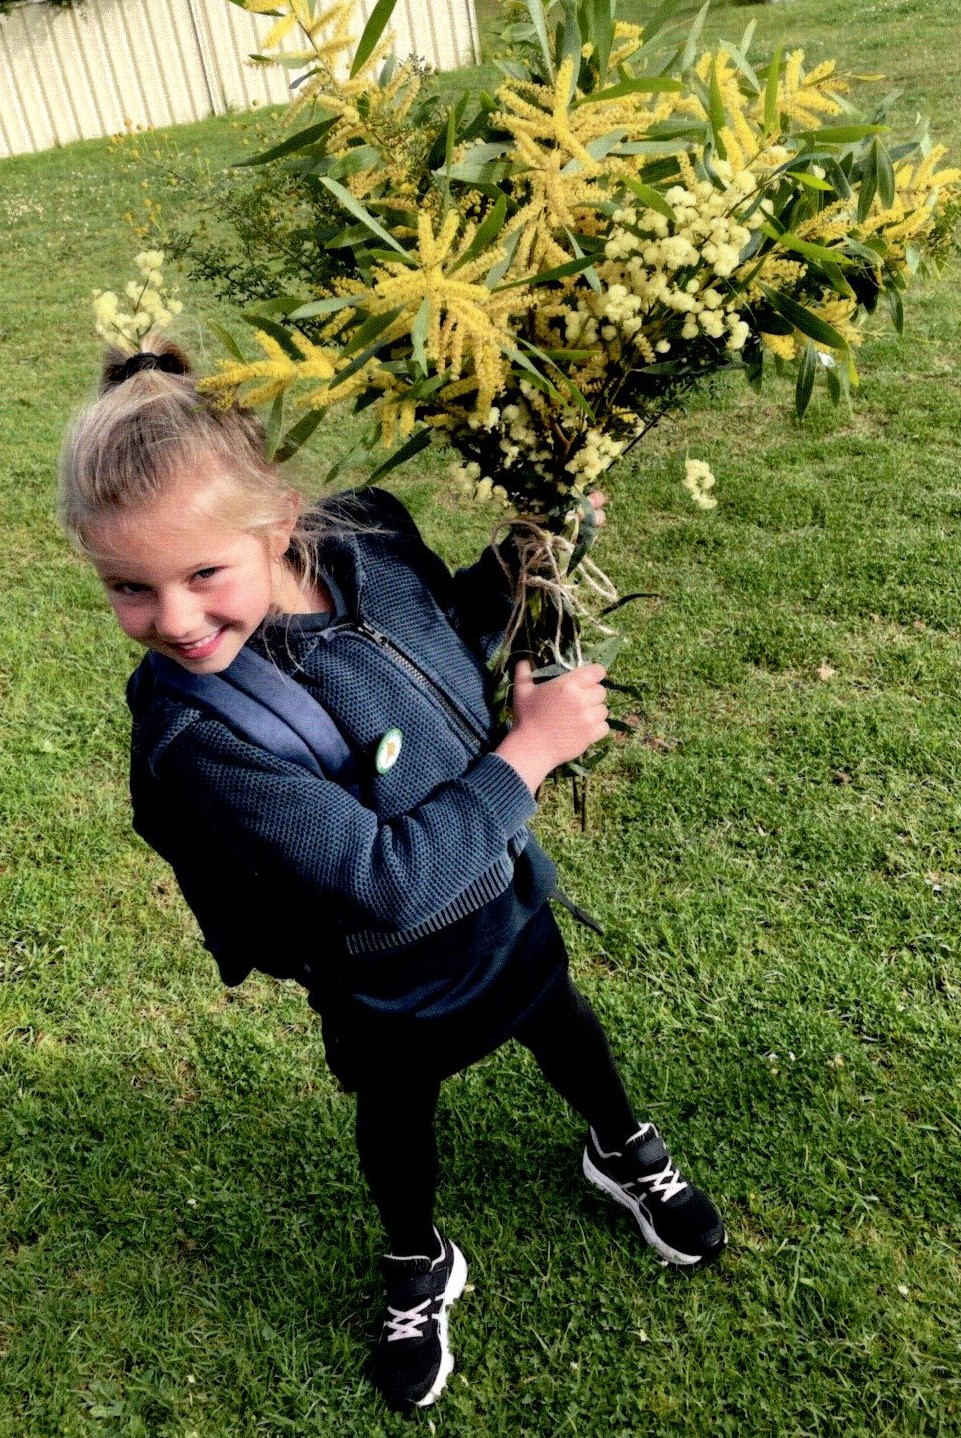 Why do we celebrate National Wattle Day? Wattle Day